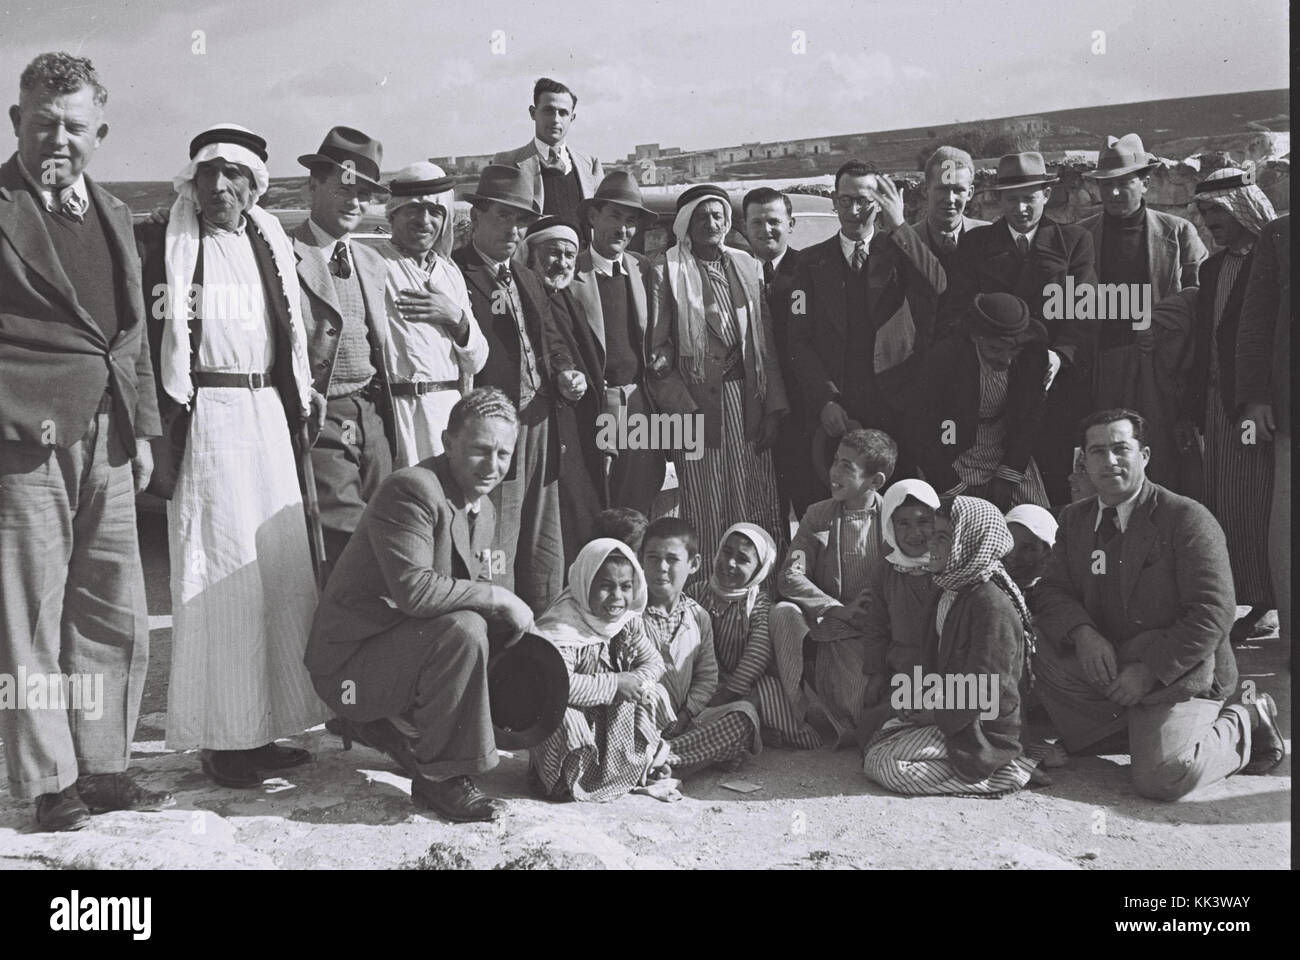 JEWISH VISITORS FROM ZICHRON YA'ACOV POSING FOR A FAREWELL PICTURE WITH JABRI AMIN EL HAJ AND MEMBERS OF HIS FAMILY BEFORE THEIR DEPARTURE FROM THE SUD814 018 Stock Photo